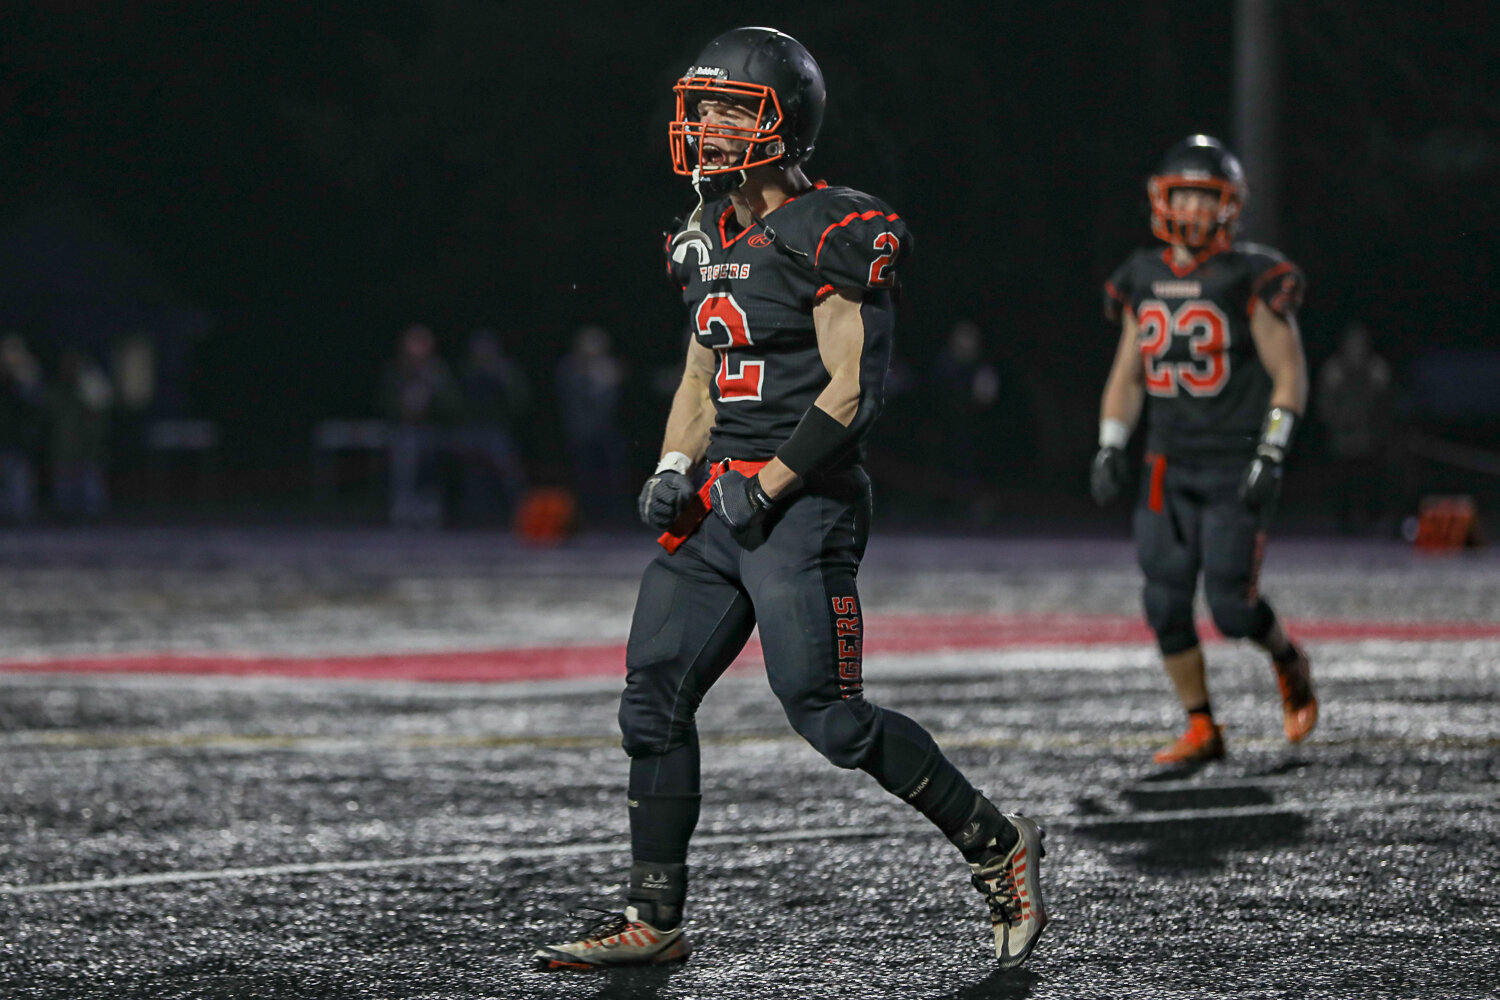 Cael Stanley celebrates a turnover during a 43-14 Napavine win over River View on Nov. 18.